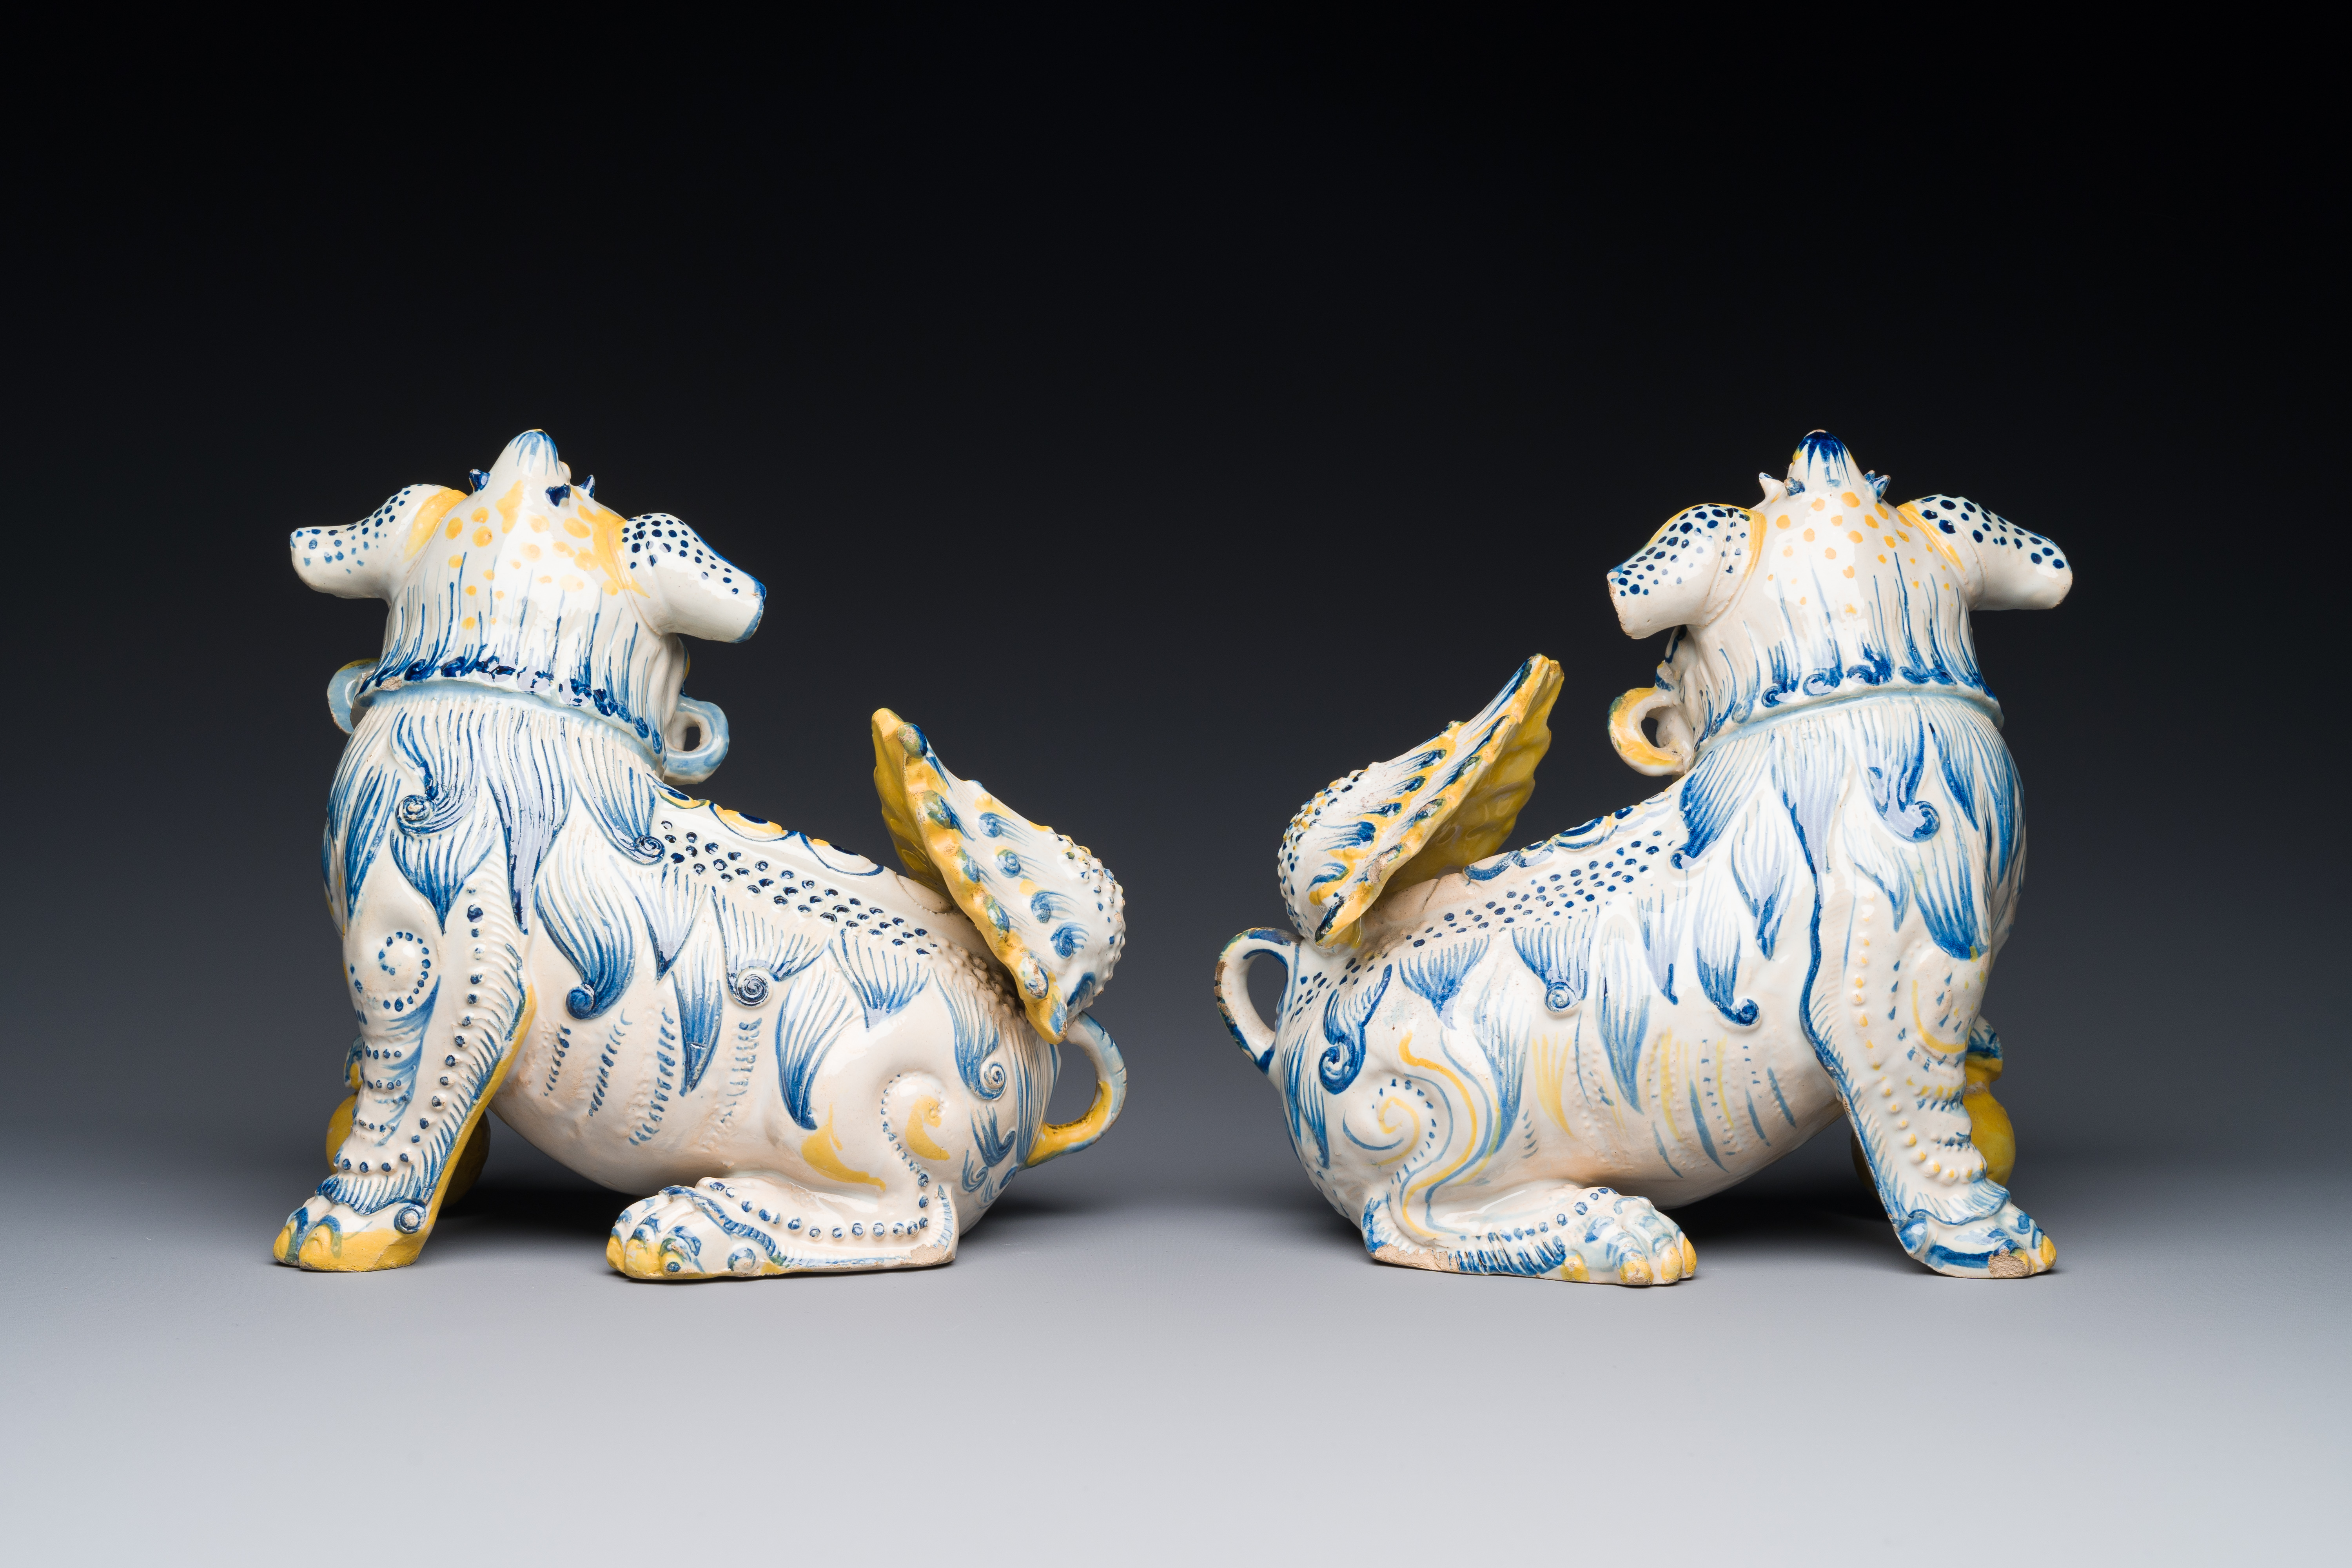 A pair of Portuguese polychrome faience sculptures of lions, 17/18th C. - Image 4 of 7